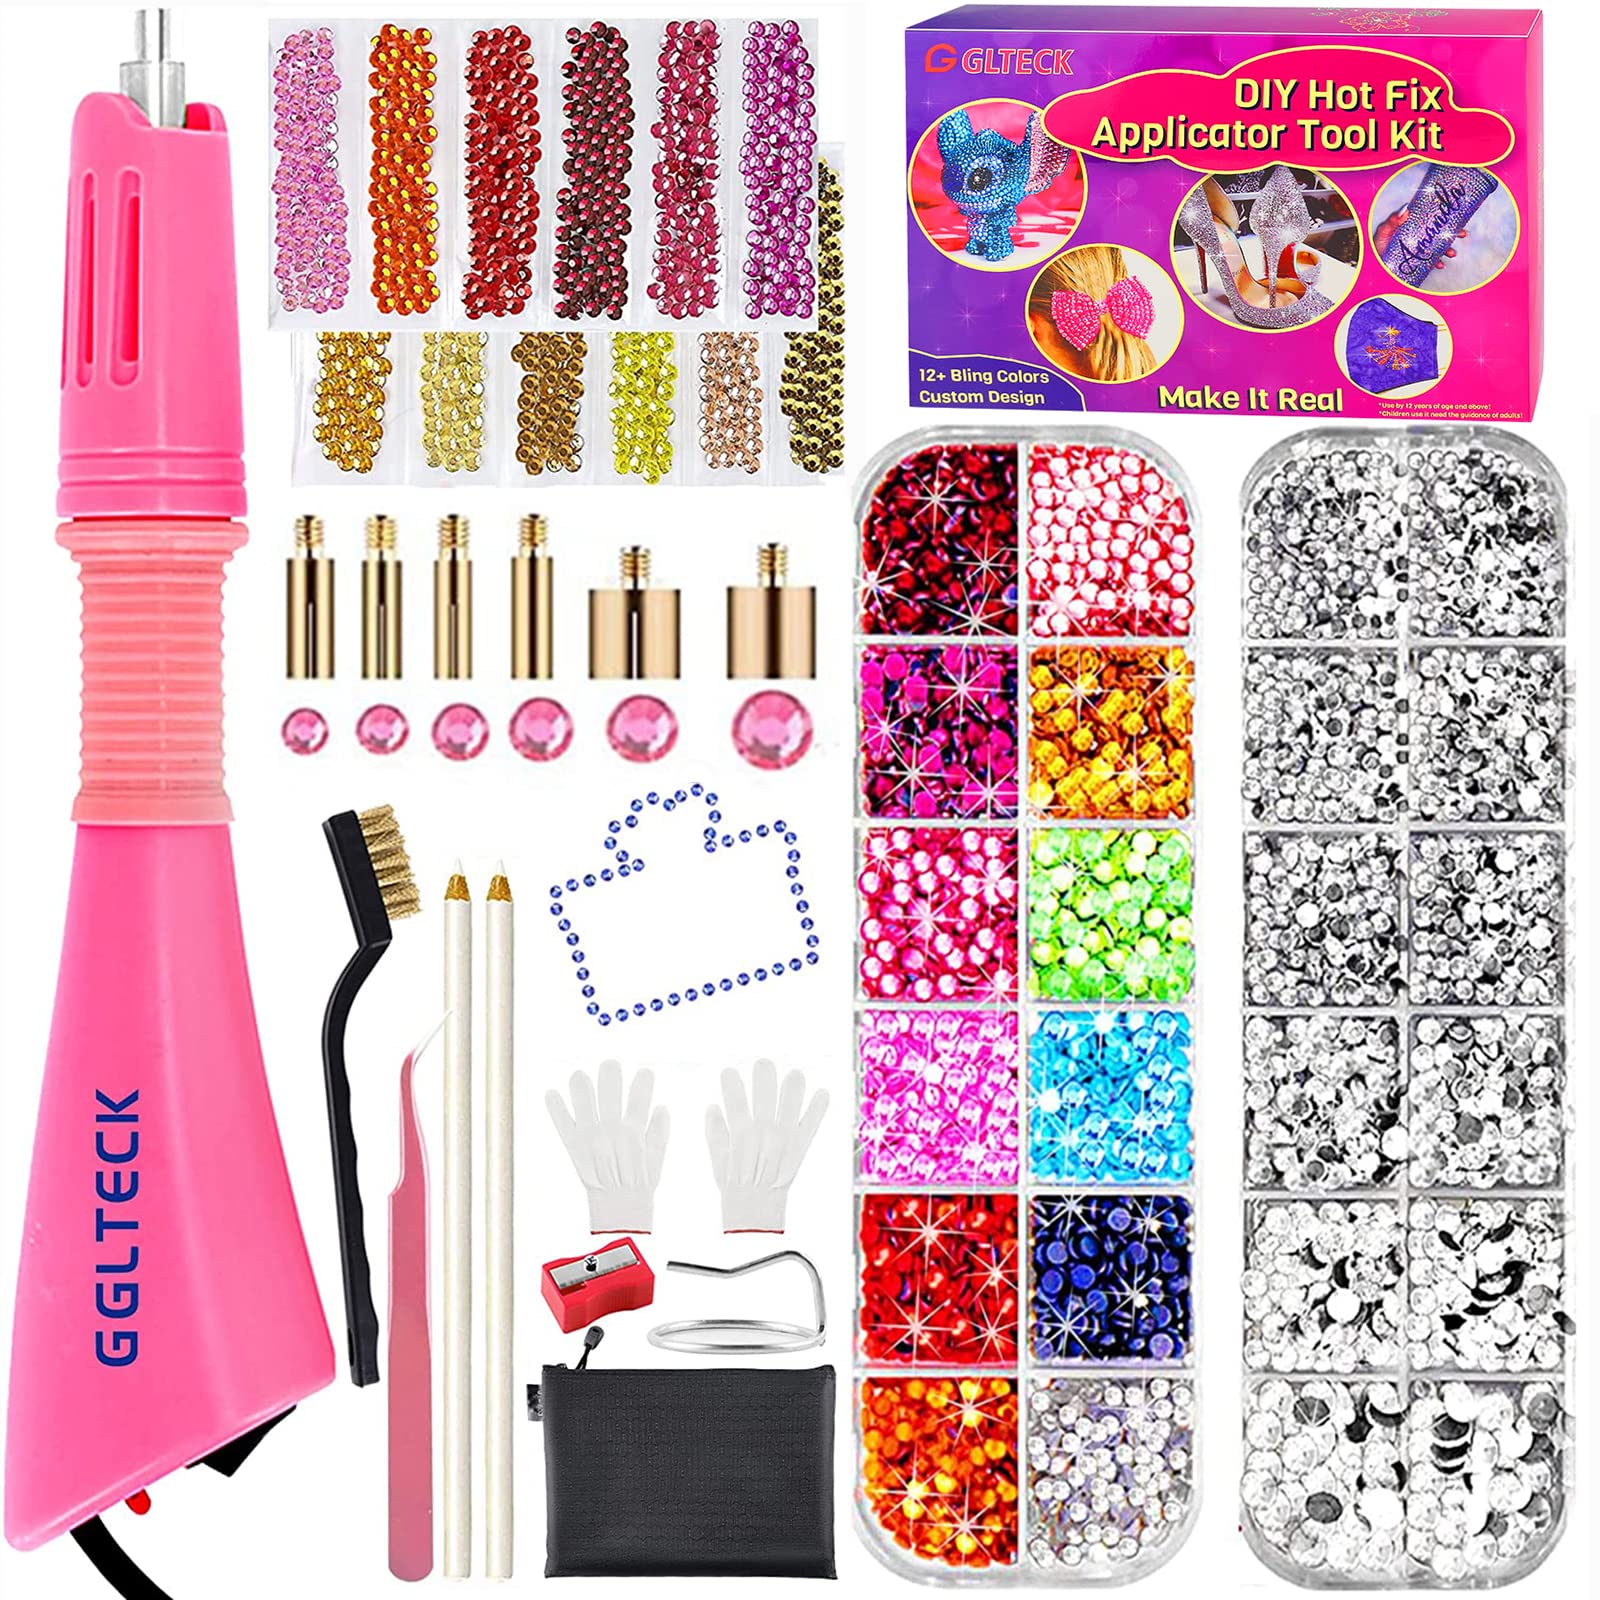 Hotfix Applicator, Bedazzler Kit with 5784 PCS Rhinestones for